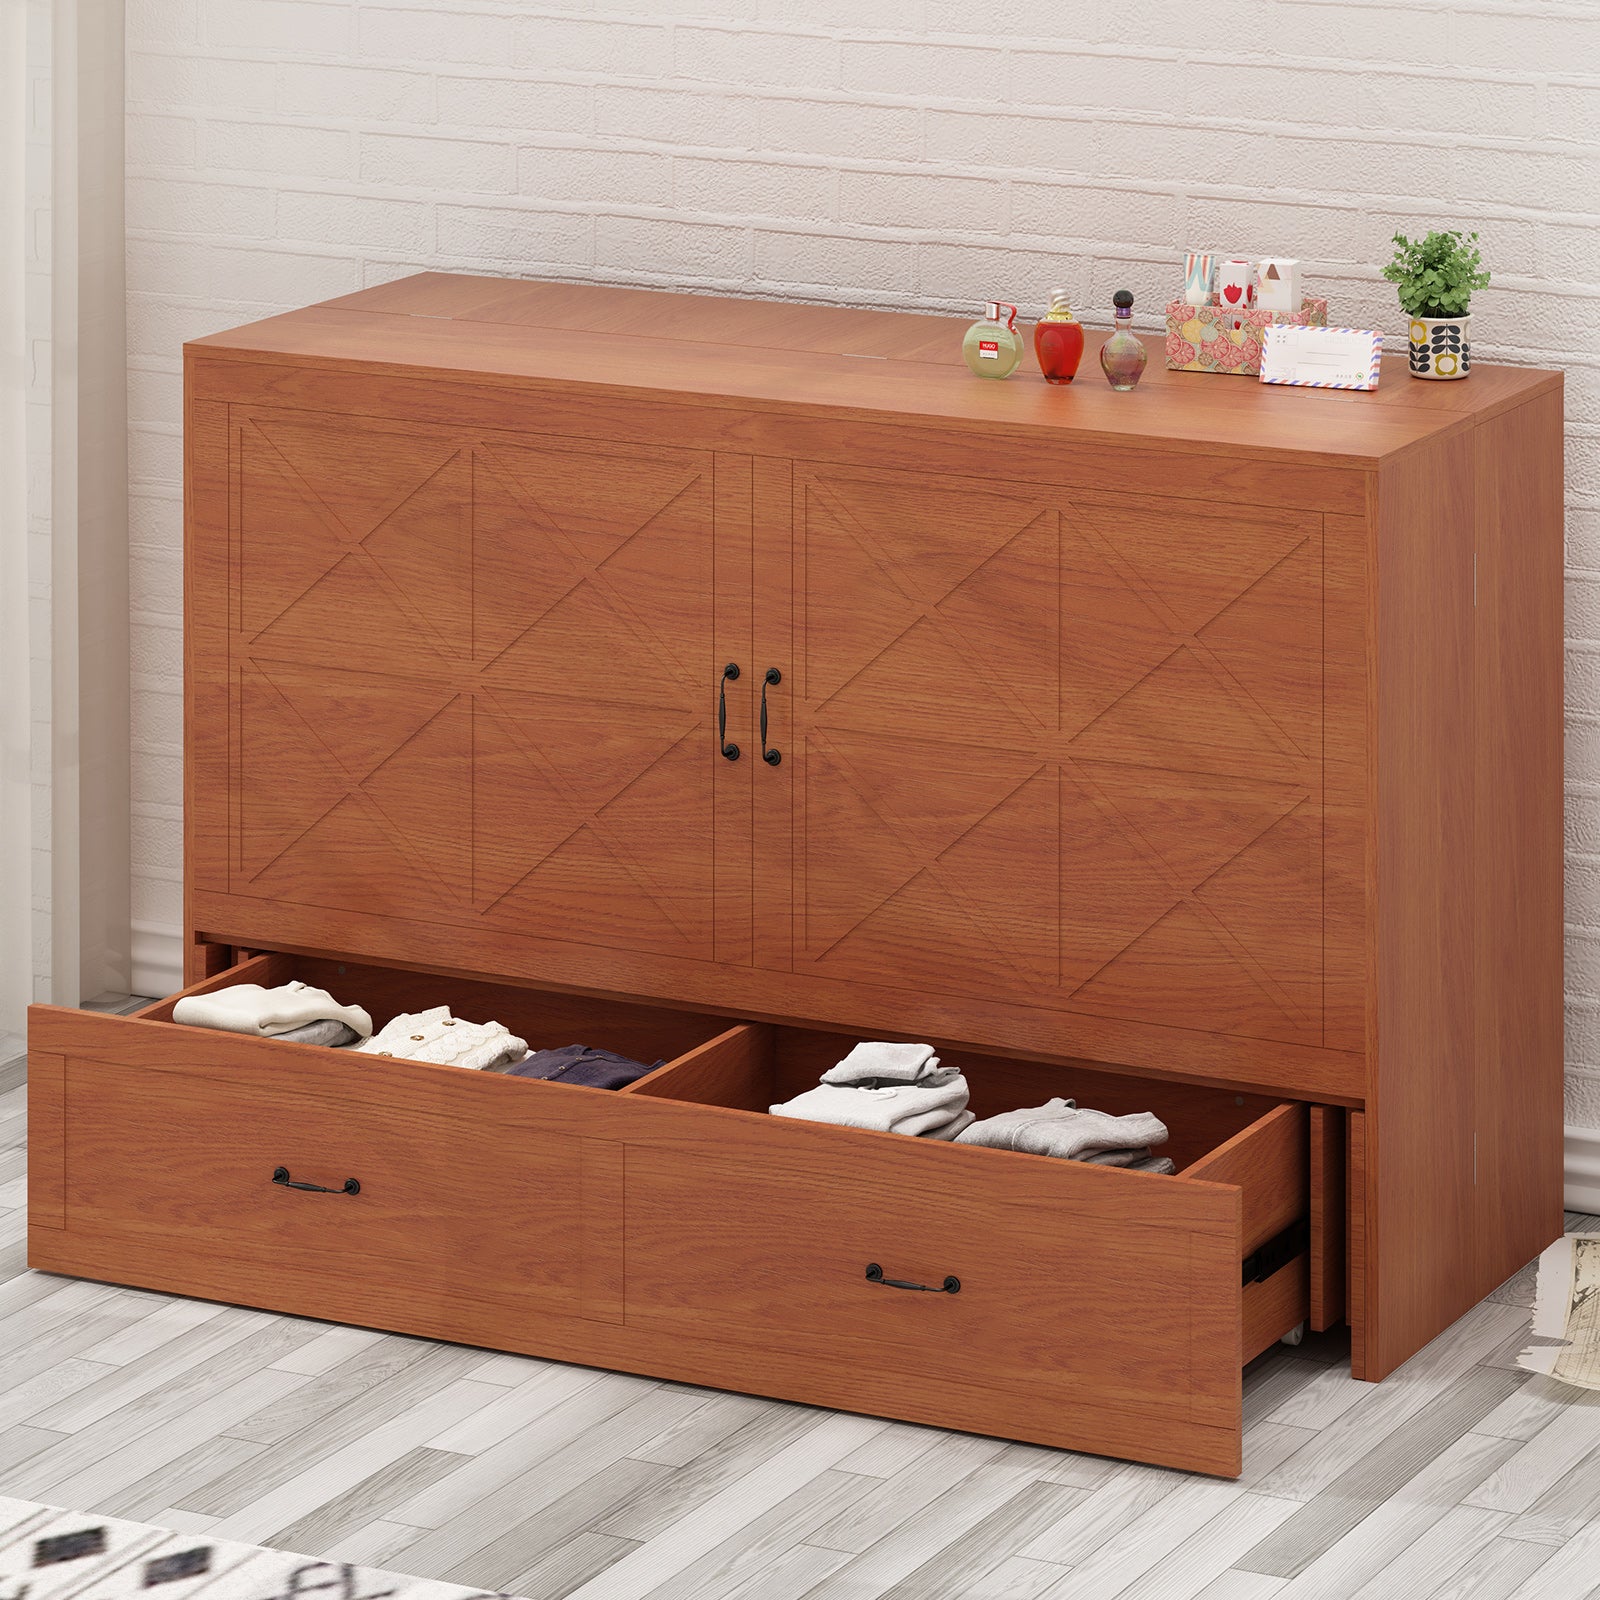 Mjkone Queen Murphy Bed Cabinet with USB Ports and 2 Storage Drawers, Convertible Folding Horizontal Murphy Bed with 5'' Mattress, Hidden Murphy Chest Bed for Guest Room, Home, Office